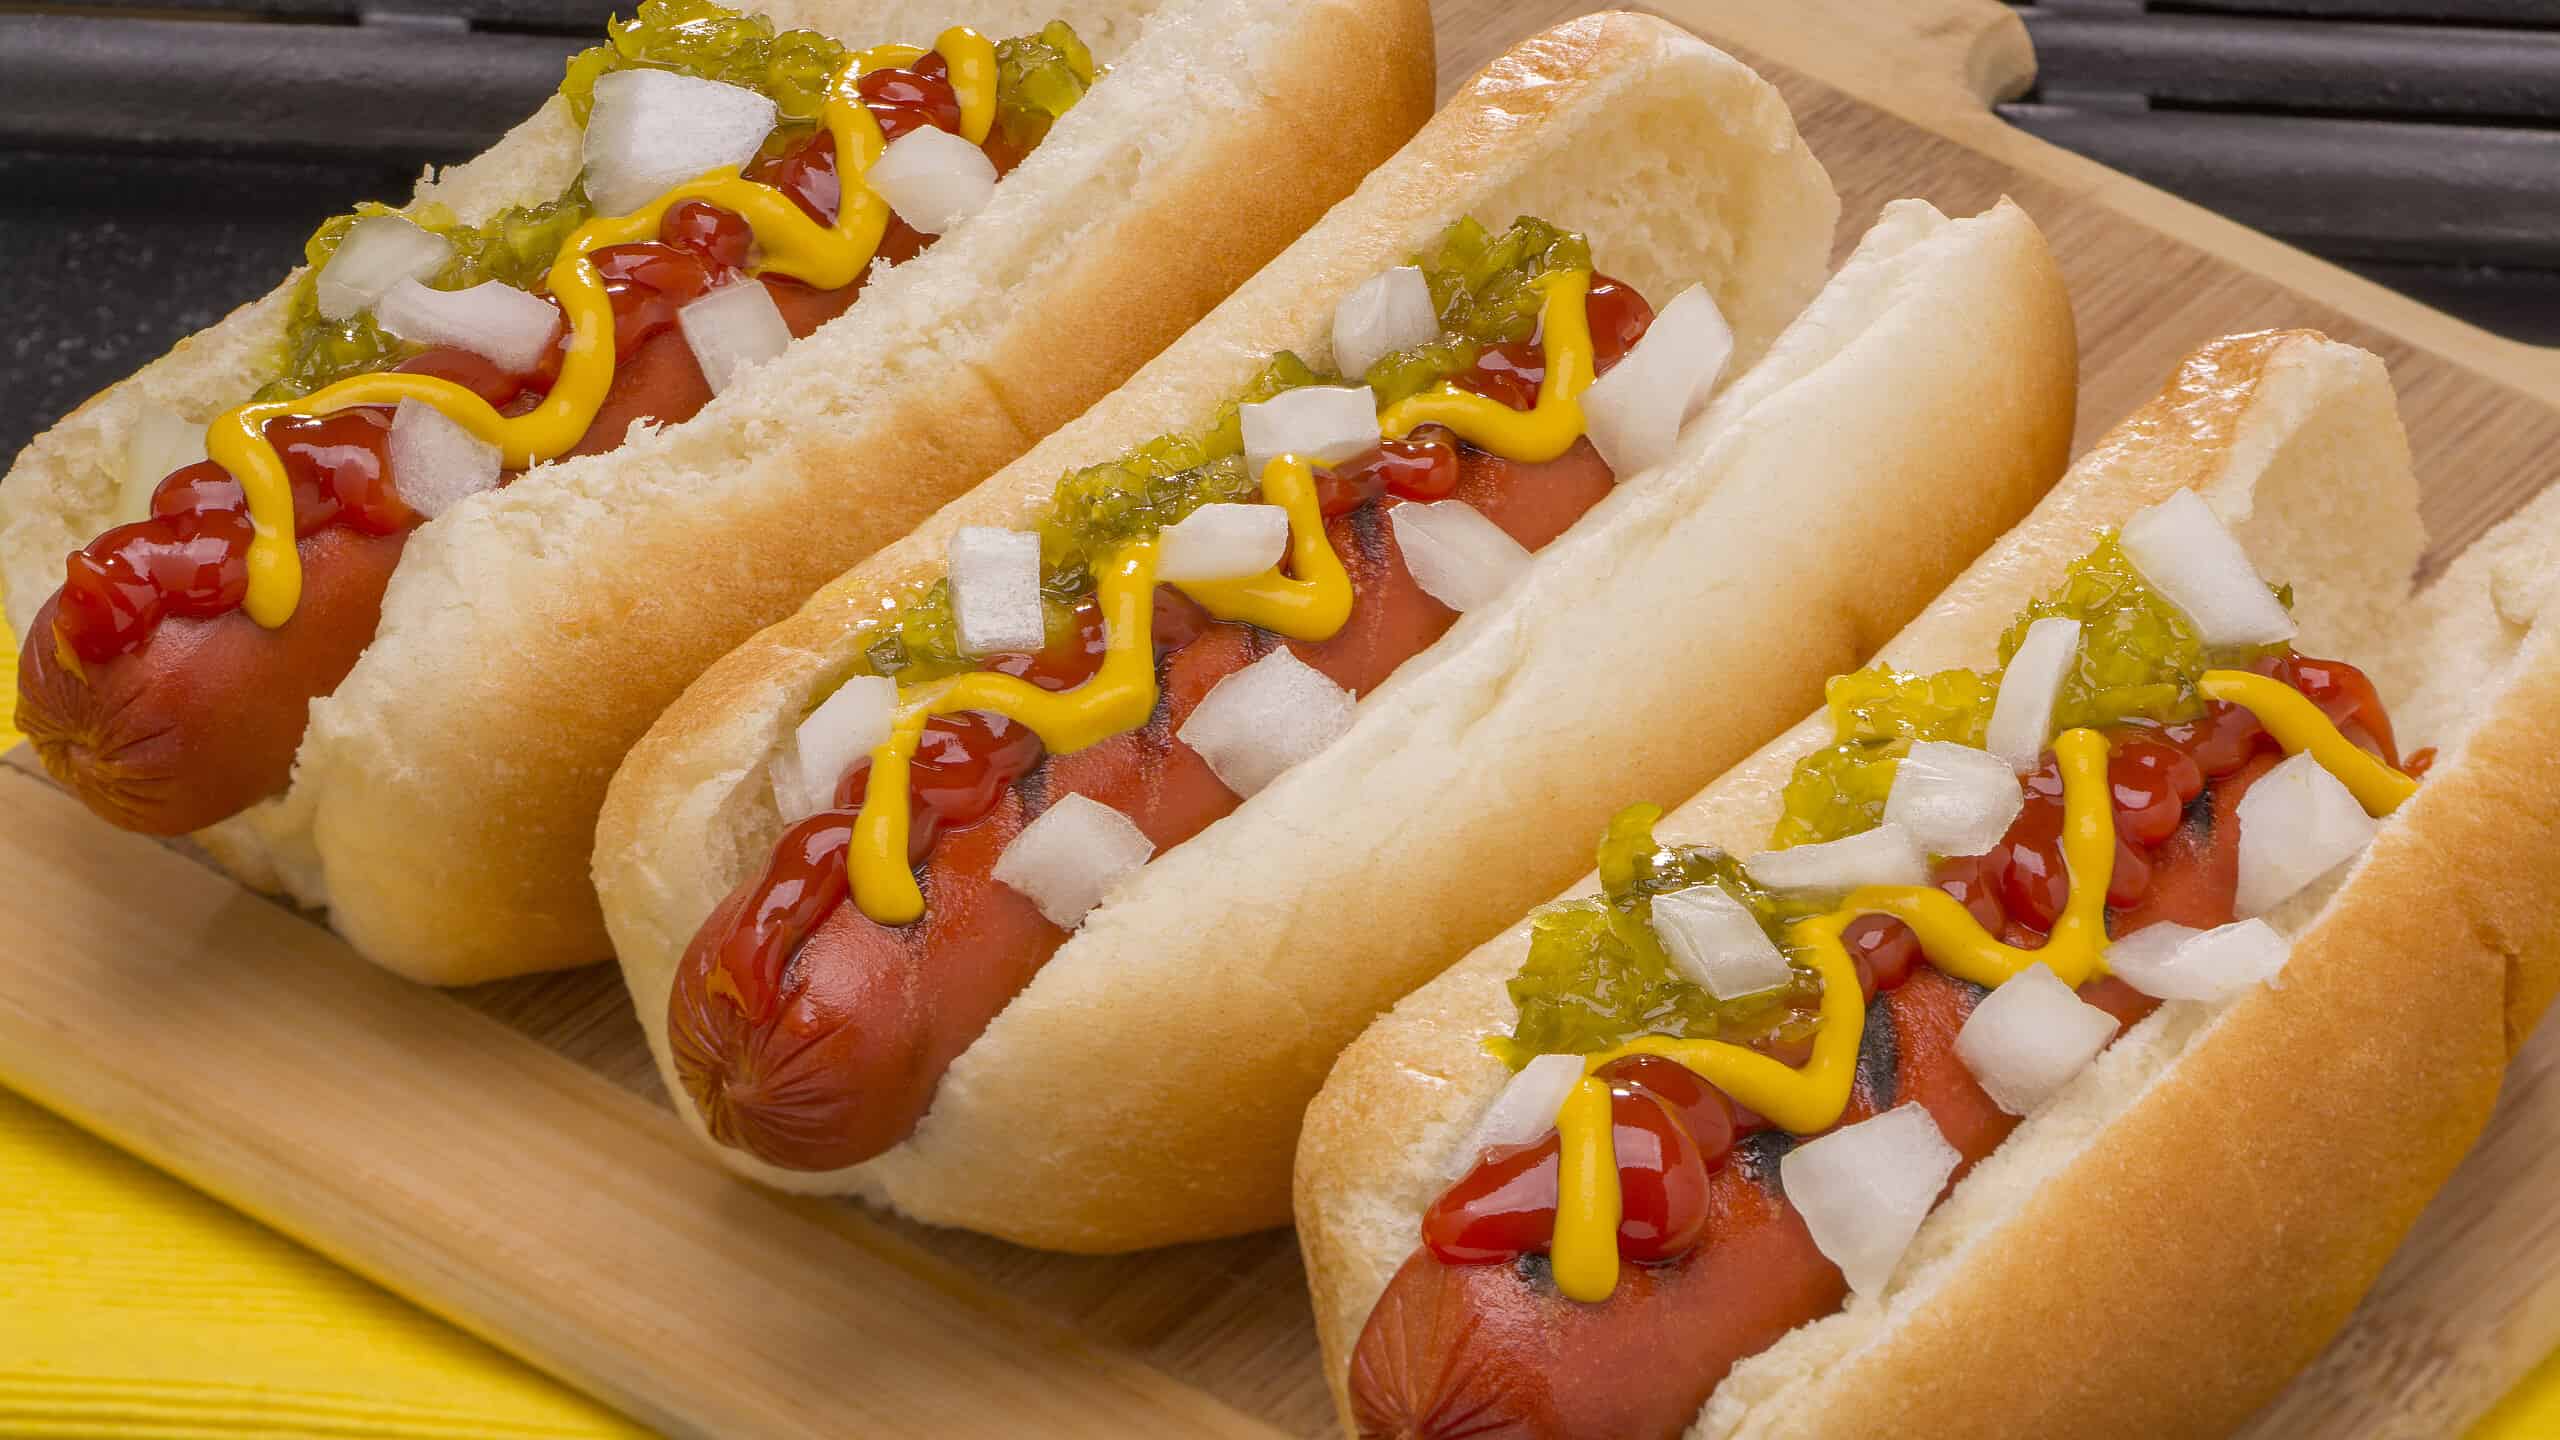 Three Hot Dogs with Mustard, Ketchup, pickle relish and onions on a wood cutting board